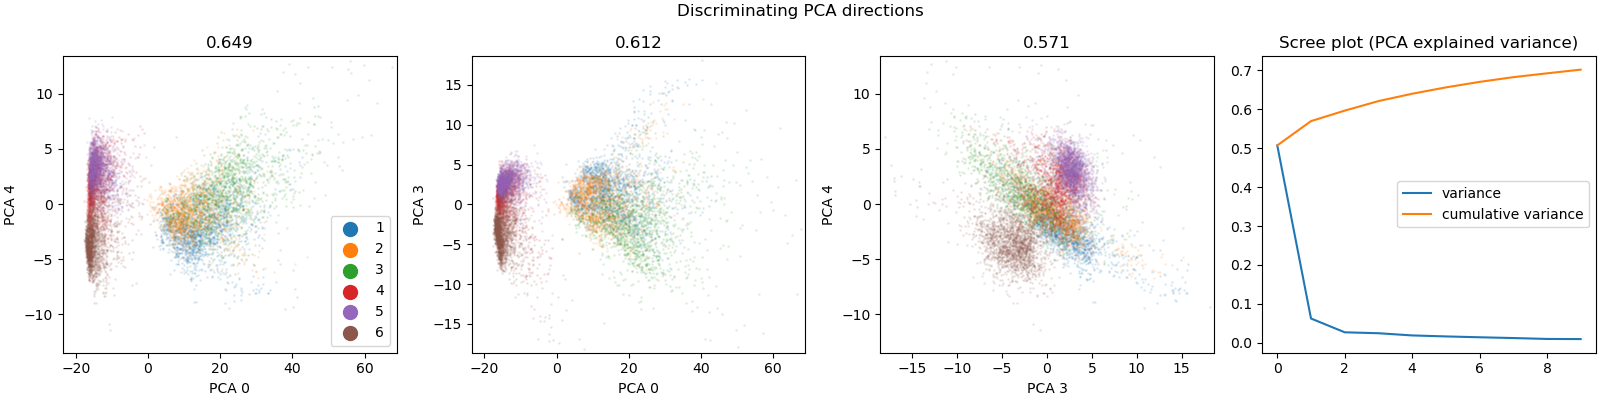 Discriminating PCA directions, 0.649, 0.612, 0.571, Scree plot (PCA explained variance)